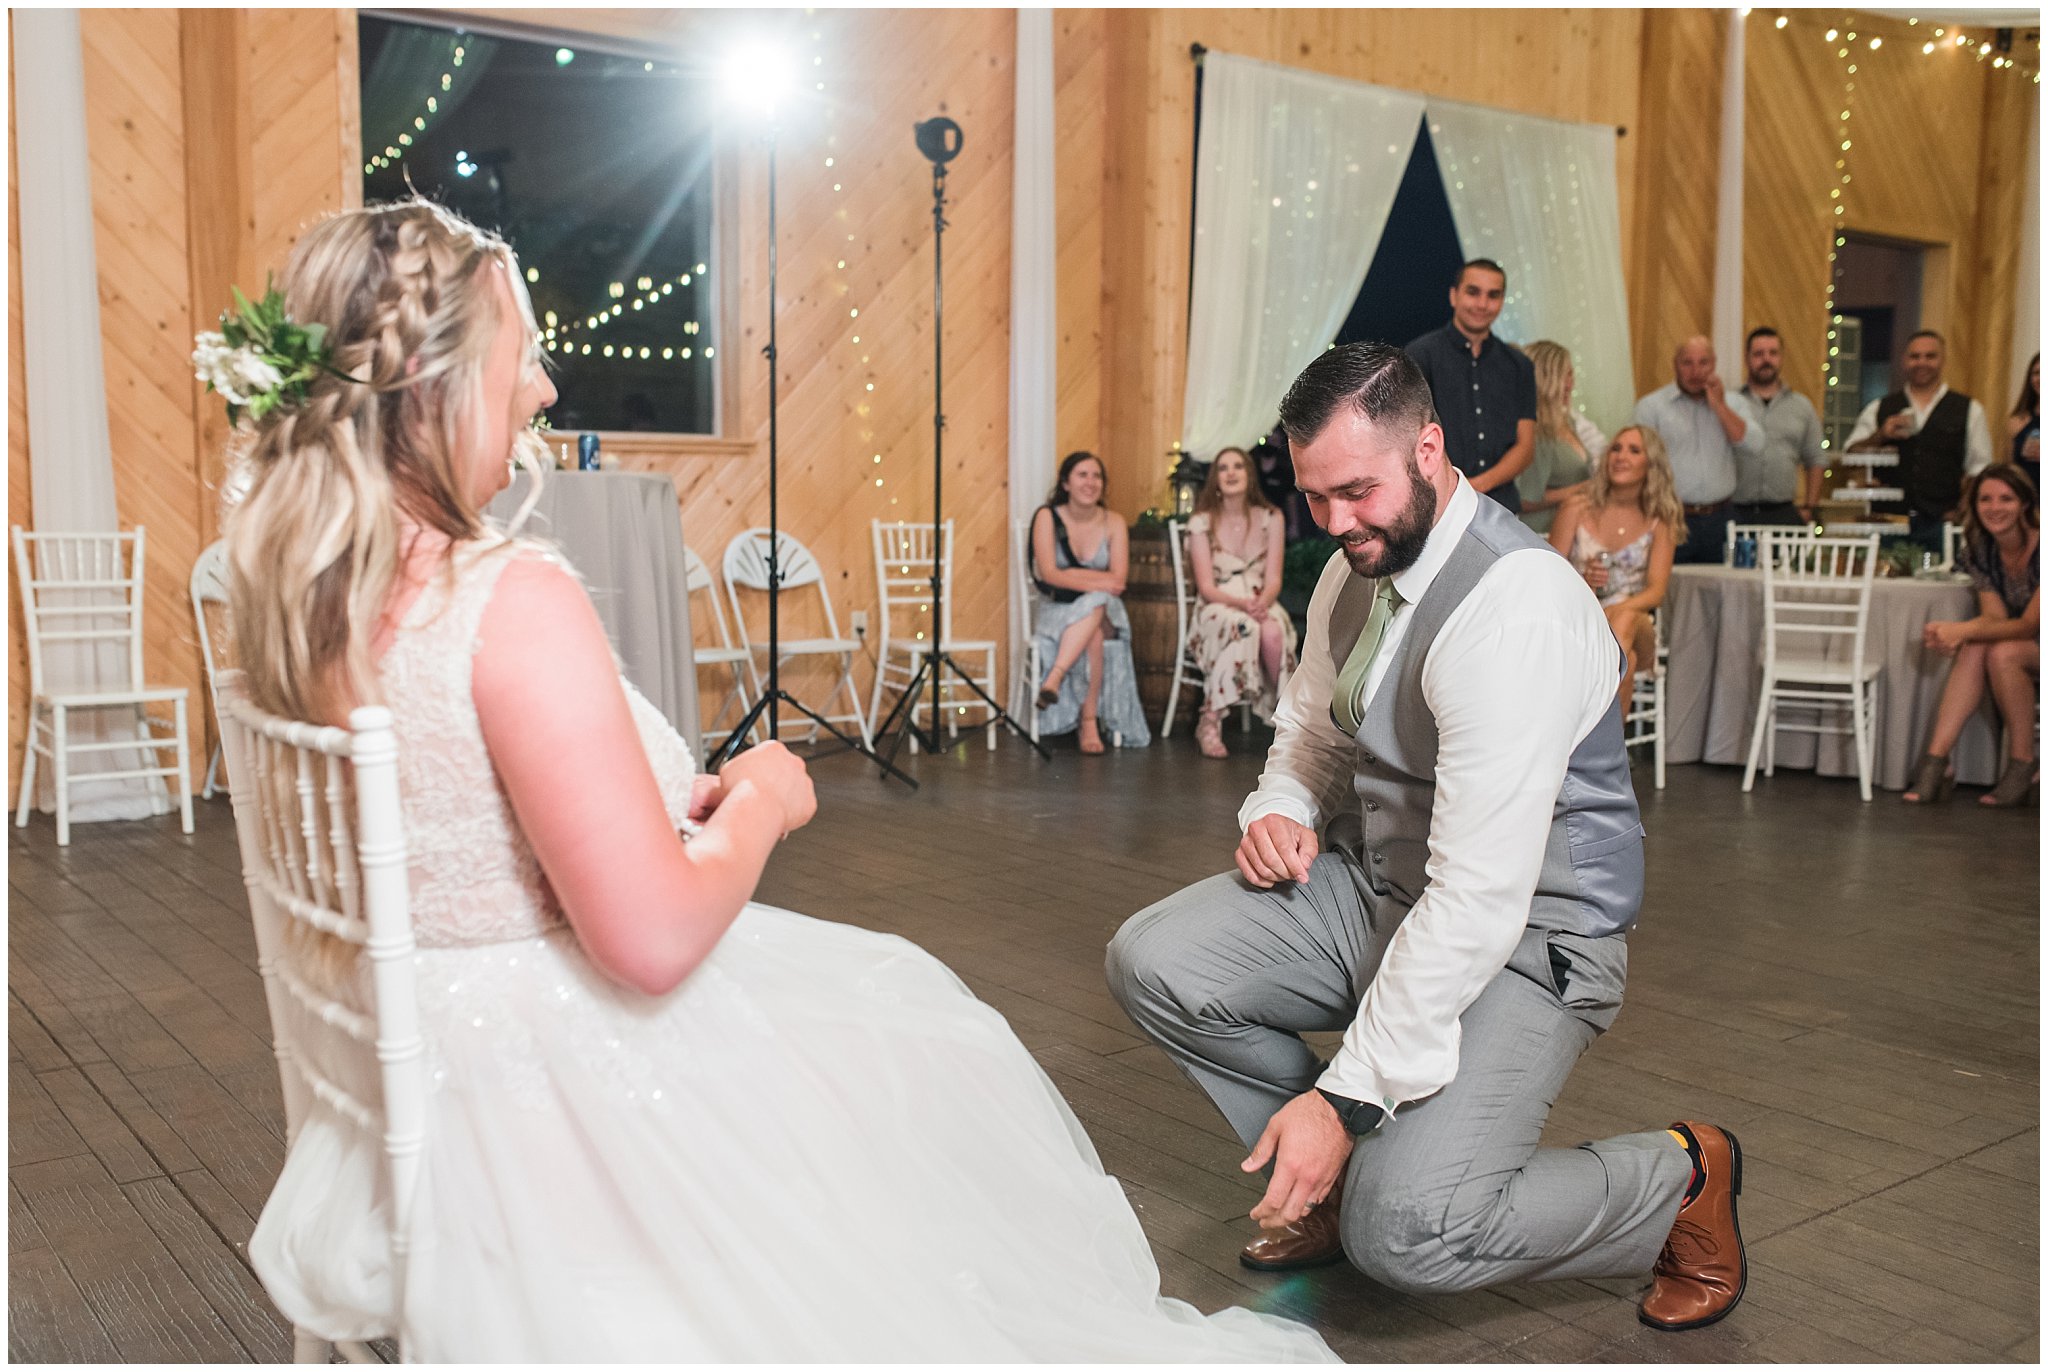 Garter toss in a barn during wedding reception | Sage Green and Gray Summer Wedding at Oak Hills | Jessie and Dallin Photography